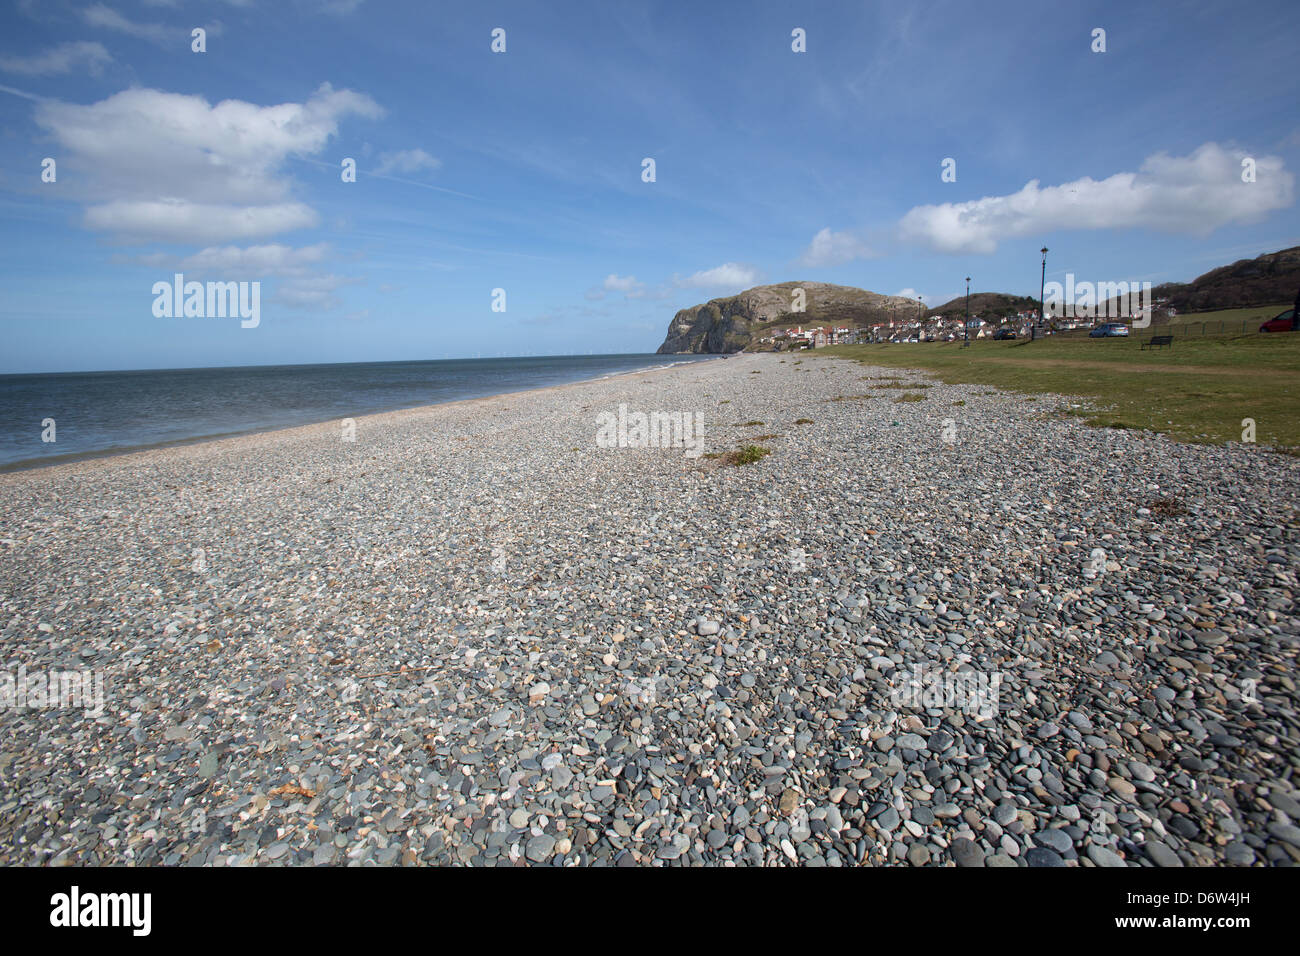 The town of Llandudno, Wales. Picturesque sunny view of the shingle beach on the north shore of Llandudno. Stock Photo